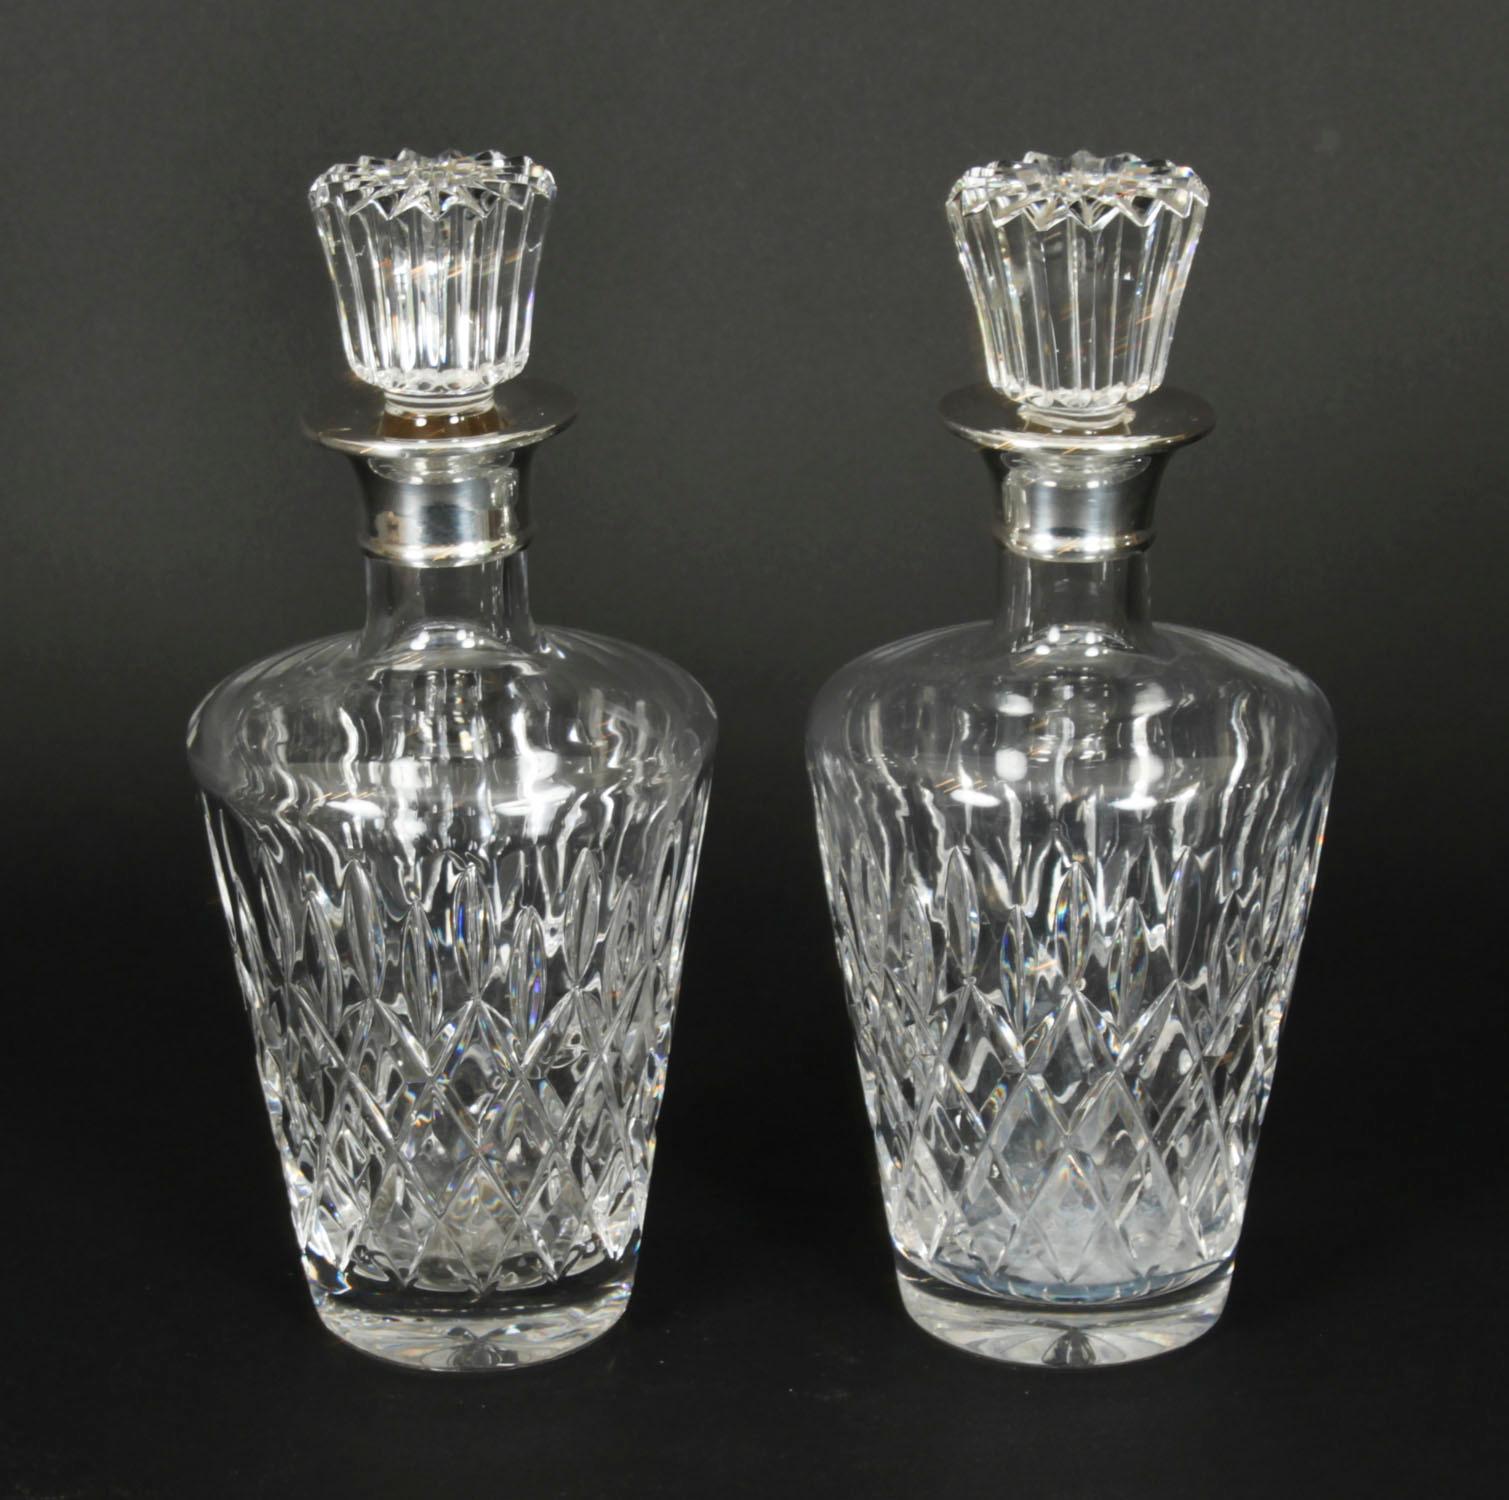 A superb pair of vintage sterling silver mounted diamond pattern crystal square decanters and stoppers, with halllmarks  for London, 1967 and the makers mark of  C J Vander Ltd

The tapering cylinder shaped diamond pattern crystal decanters feature